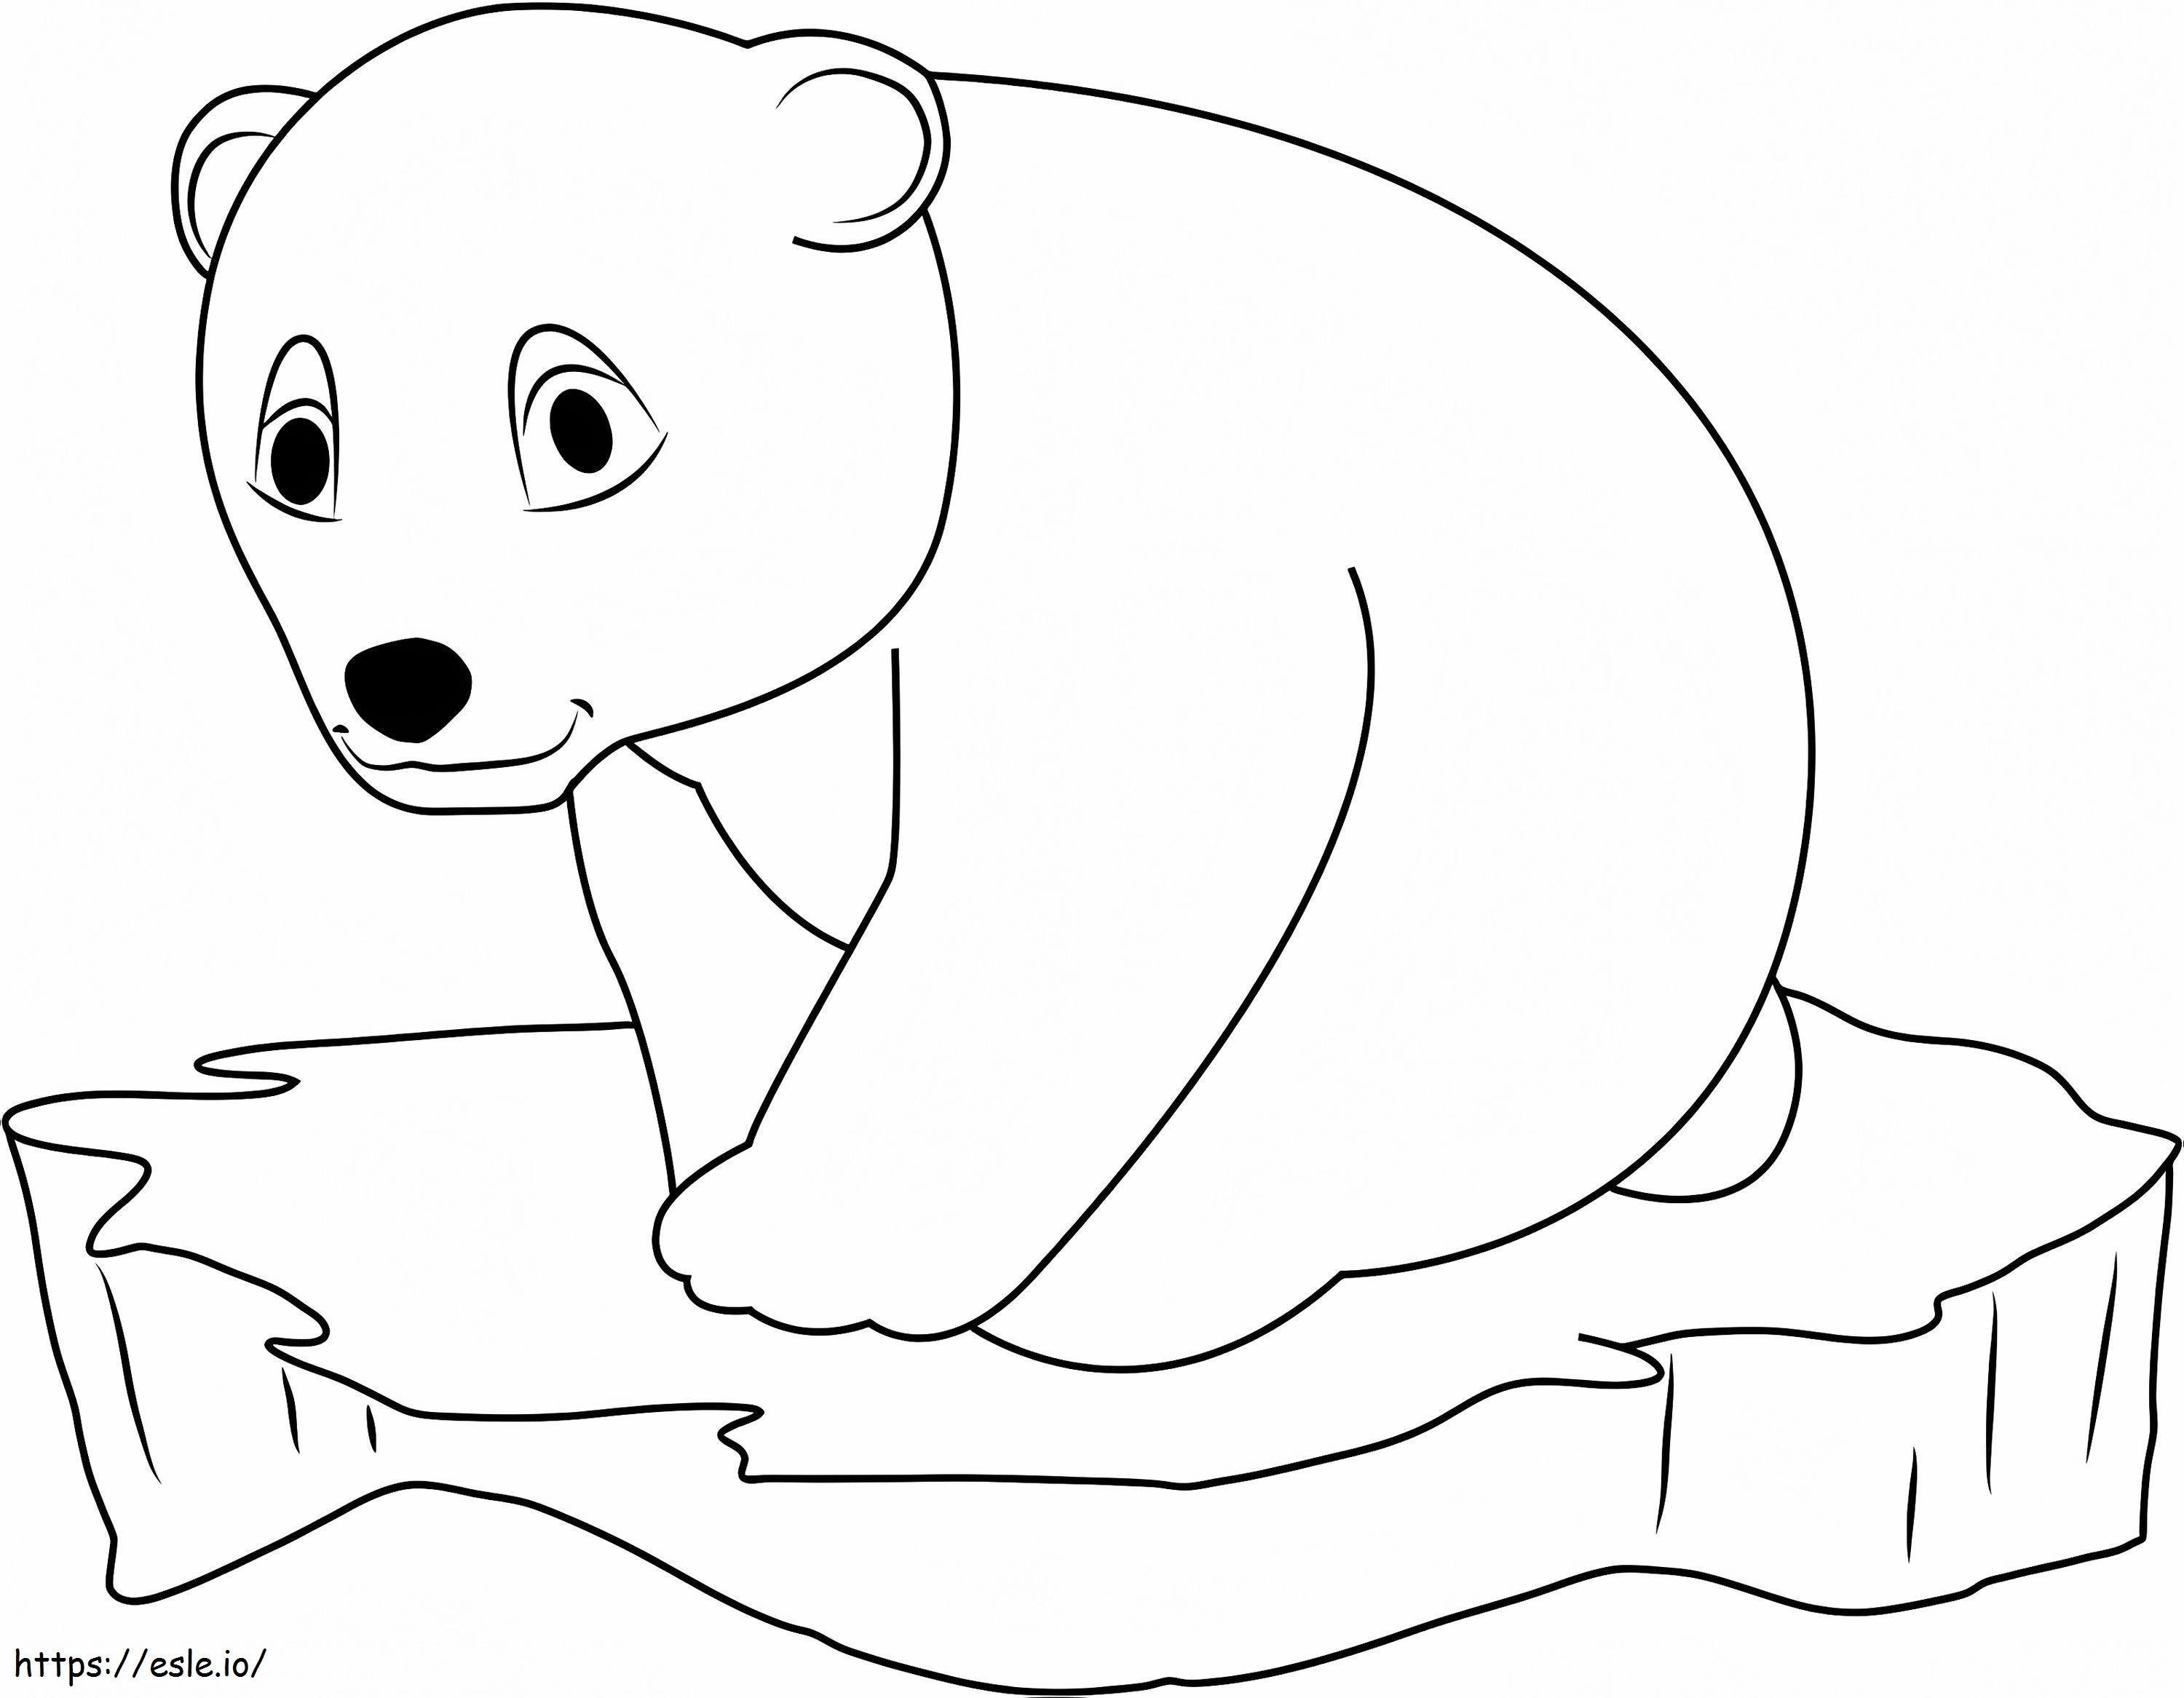 1532310780 Lars On Ice A4 E1600337947875 coloring page